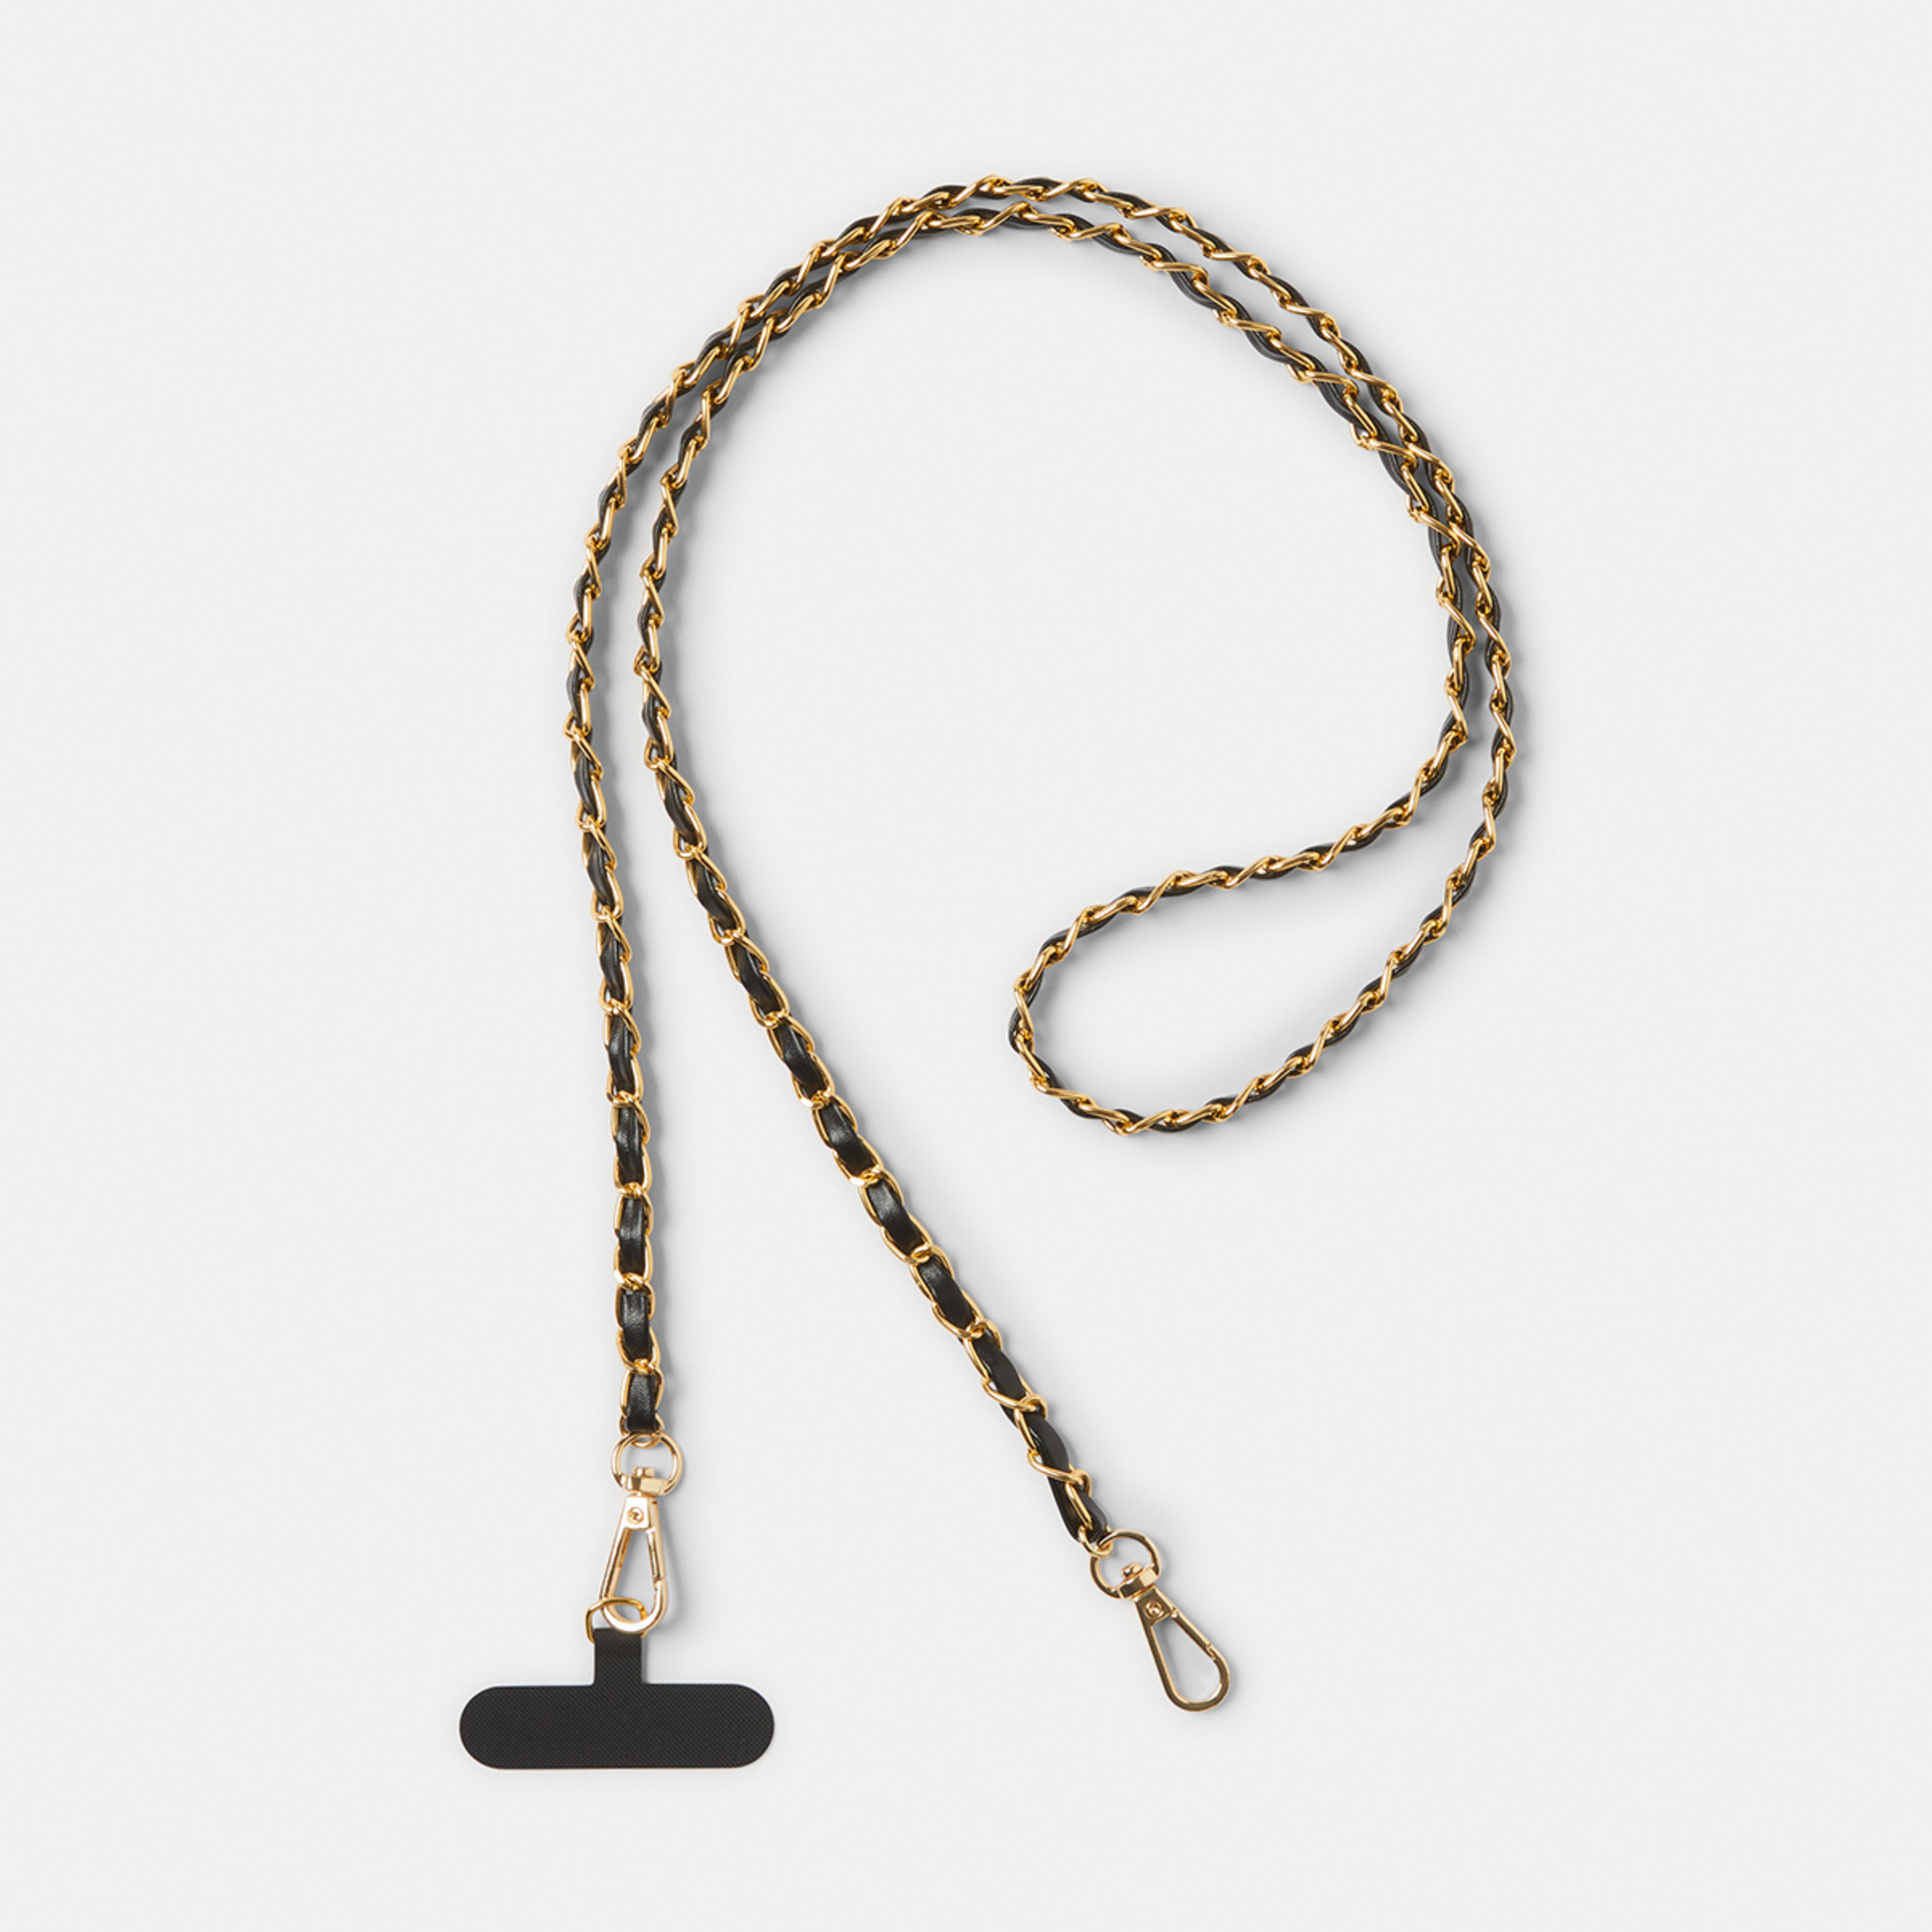 Phone Strap - Black and Gold Tone - Kmart